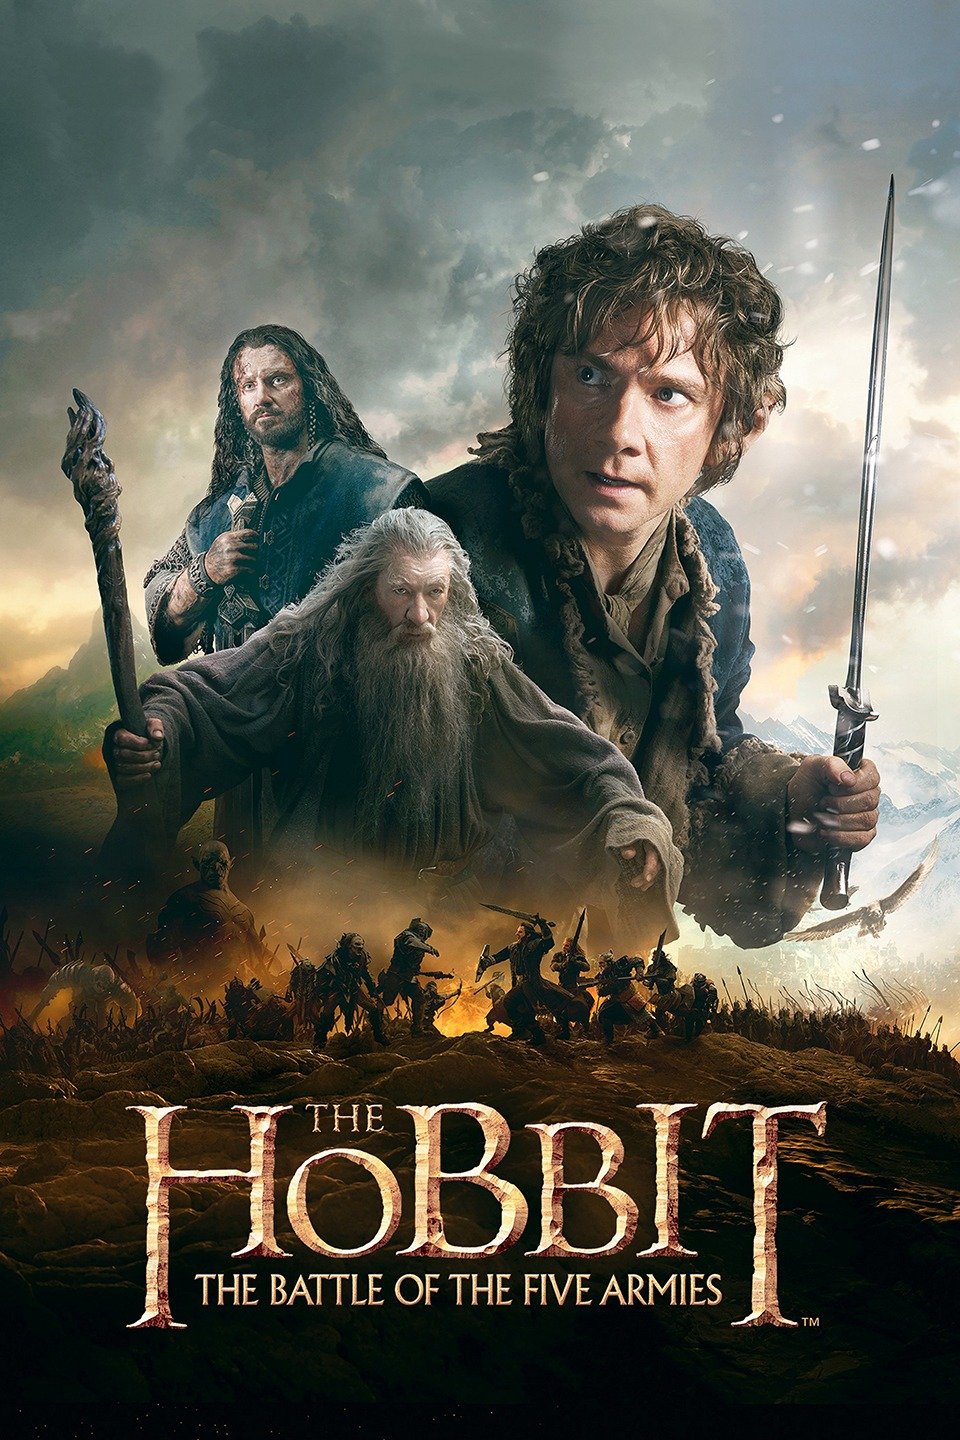 Franchise Rewind: The Hobbit: An Unexpected Journey (2012) The Hobbit: The  Desolation of Smaug (2013) The Hobbit: The Battle of the Five Armies (2014)  | VHS Rewind!